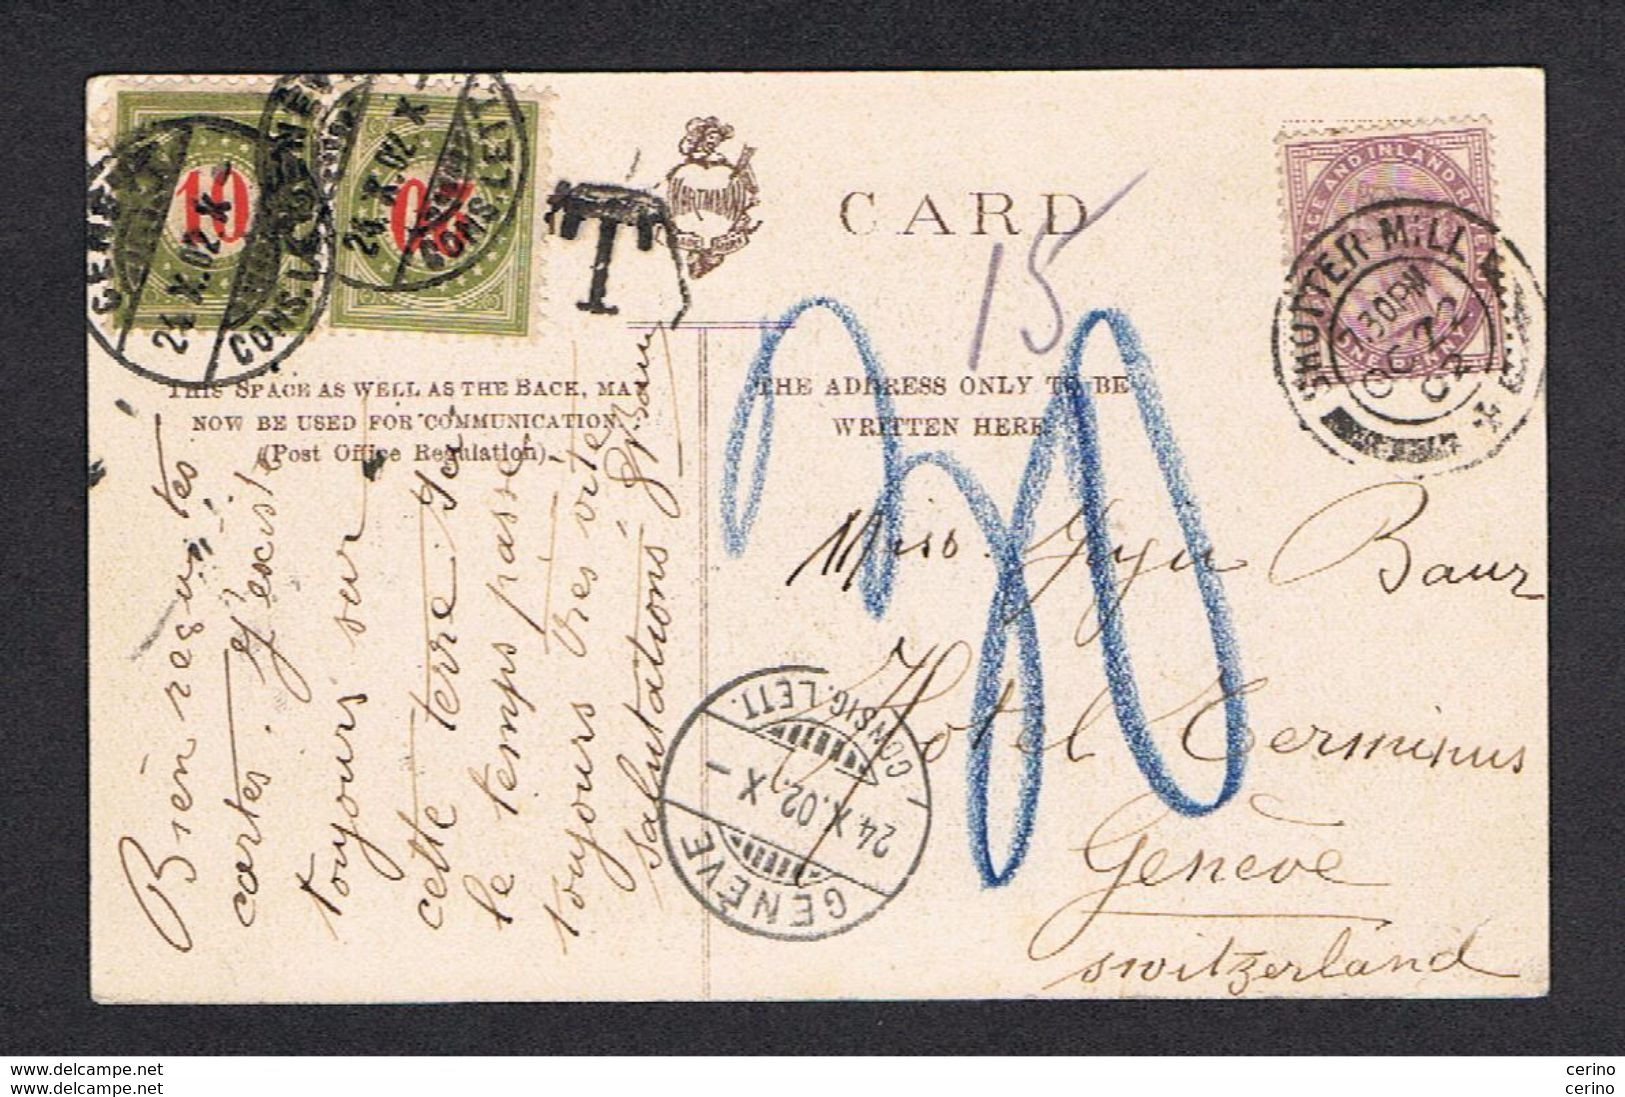 GREAT  BRITAIN:  VICTORIA  ONE  PENNY  ON  POSTCARD  TO  SWITZERLAND  -  TAXED  IN  ARRIVAL  -  FP - Covers & Documents